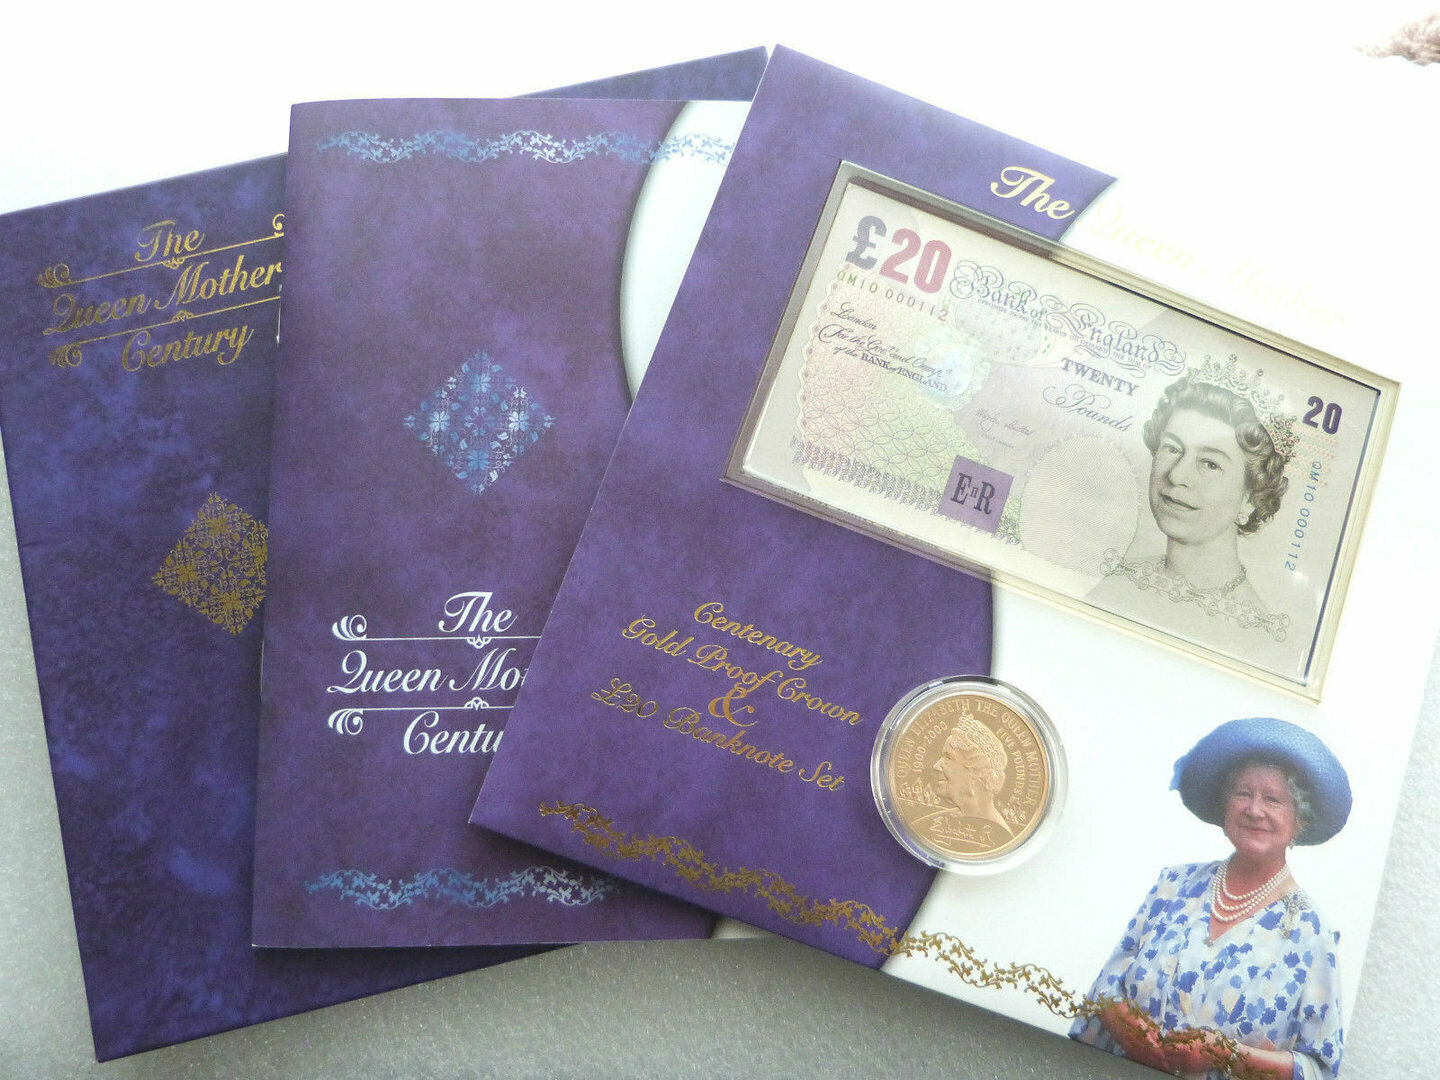 2000 Queen Mother Centenary £5 Gold Proof Coin £20 Banknote Set